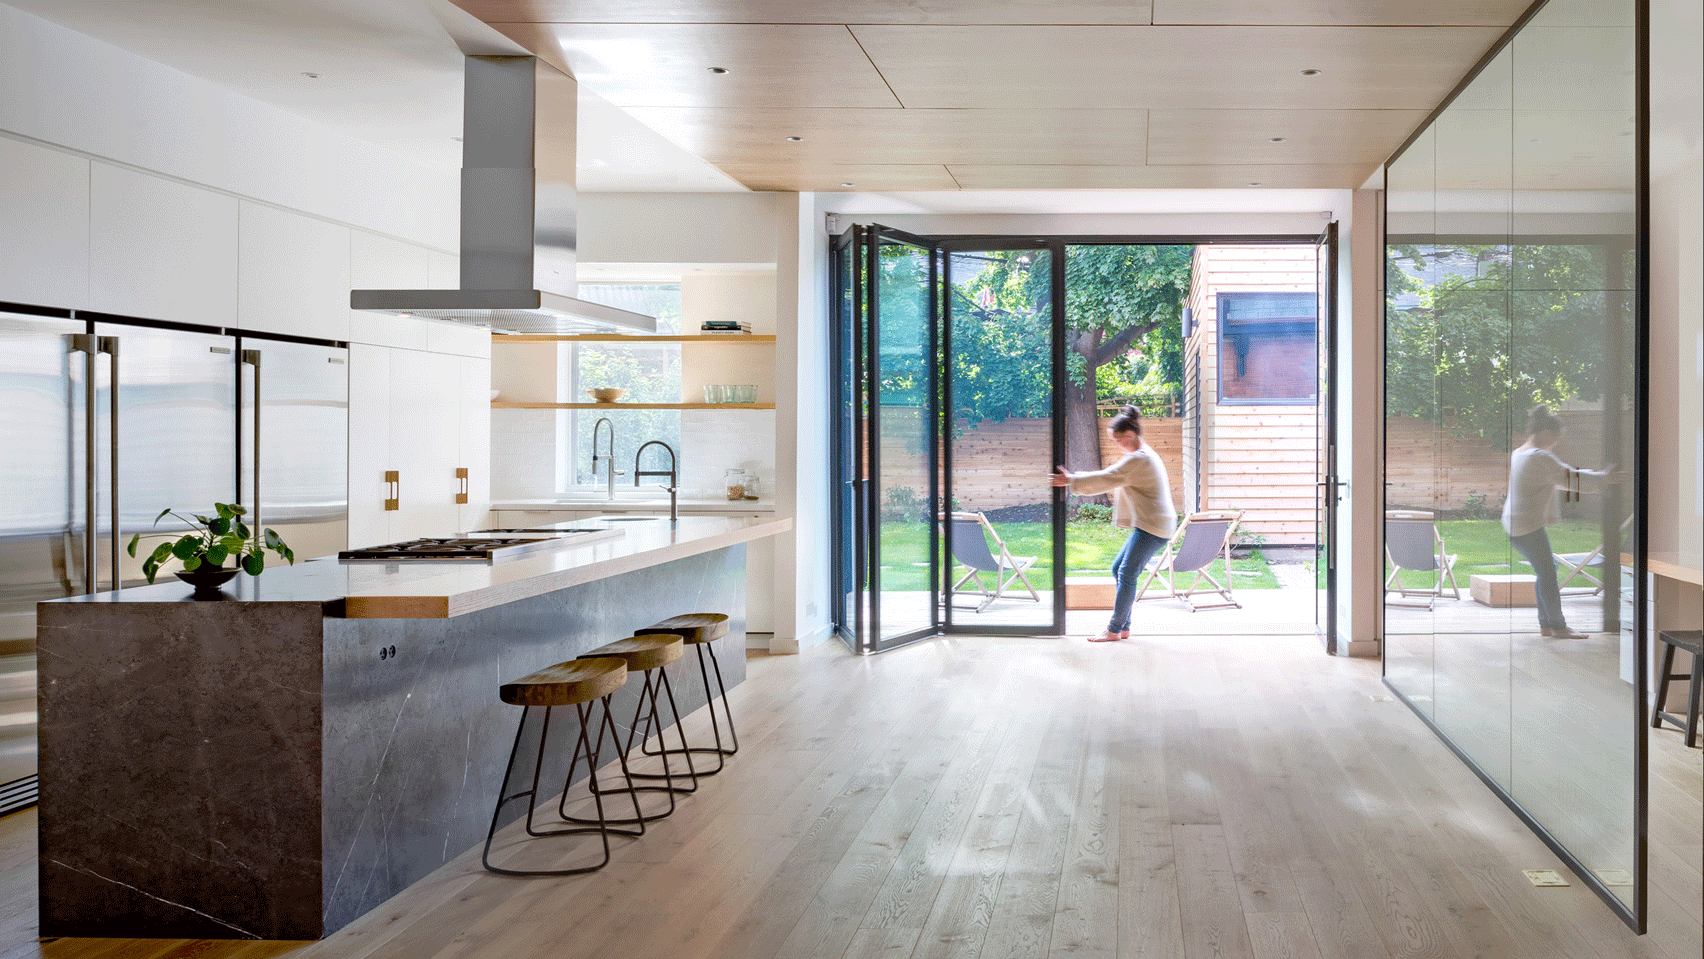 Ten interiors by architects that use internal glazing to create ...